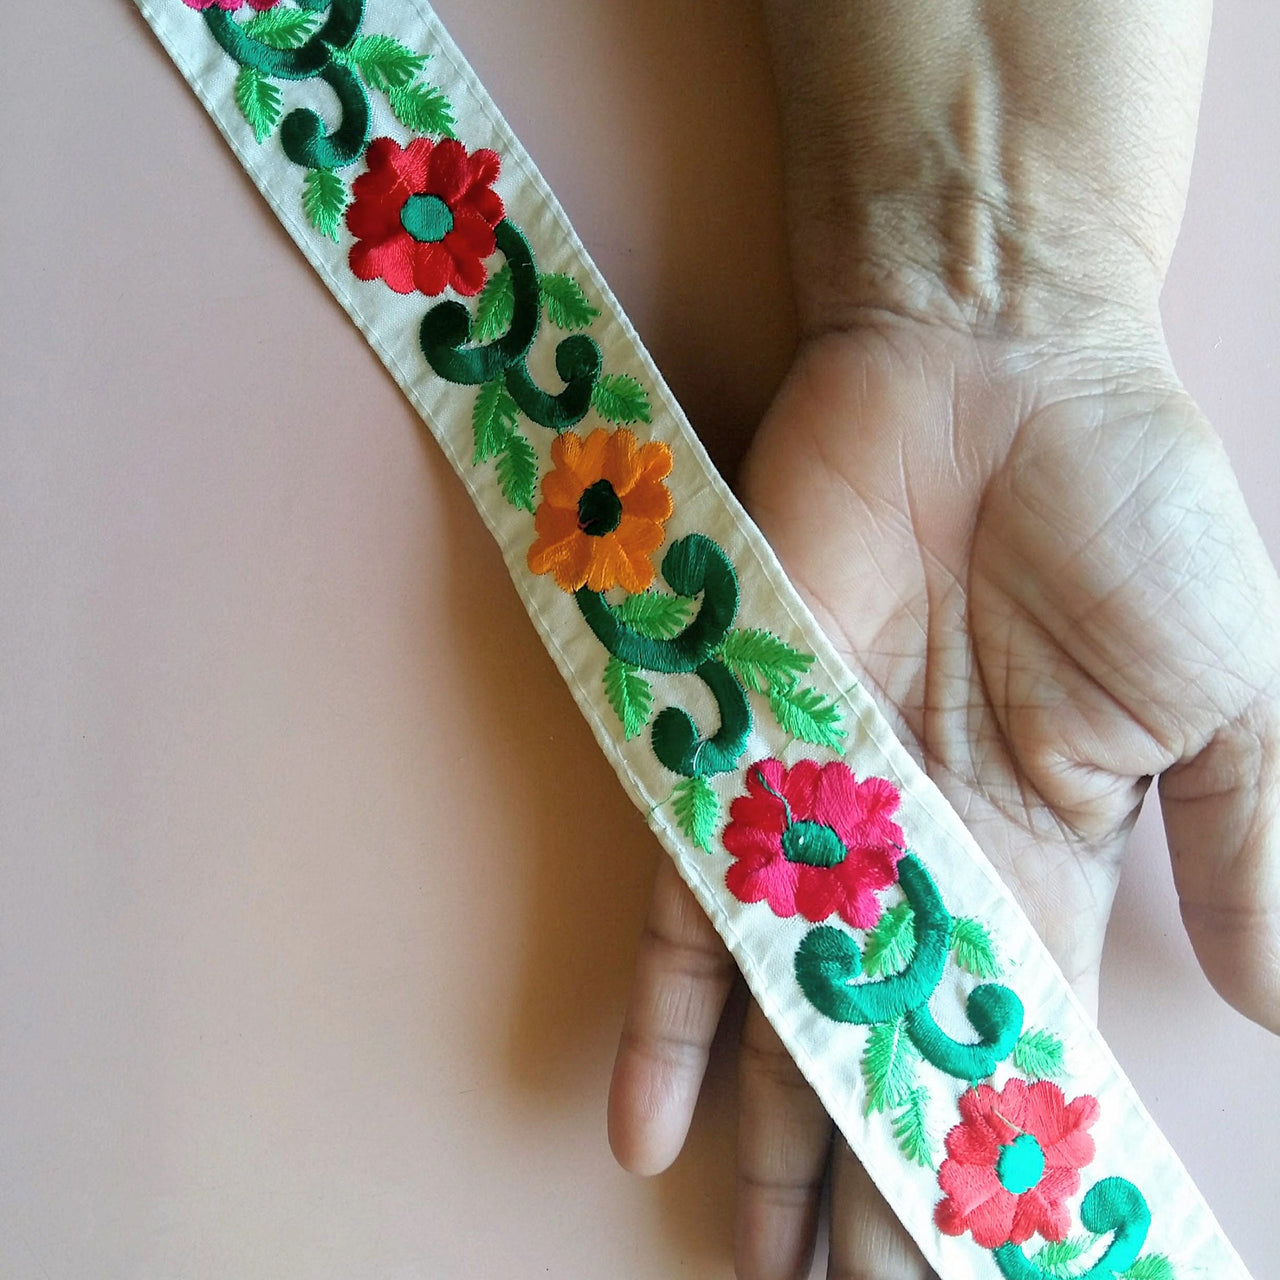 Off White Fabric Trim With Floral Embroidery, Pink, Red